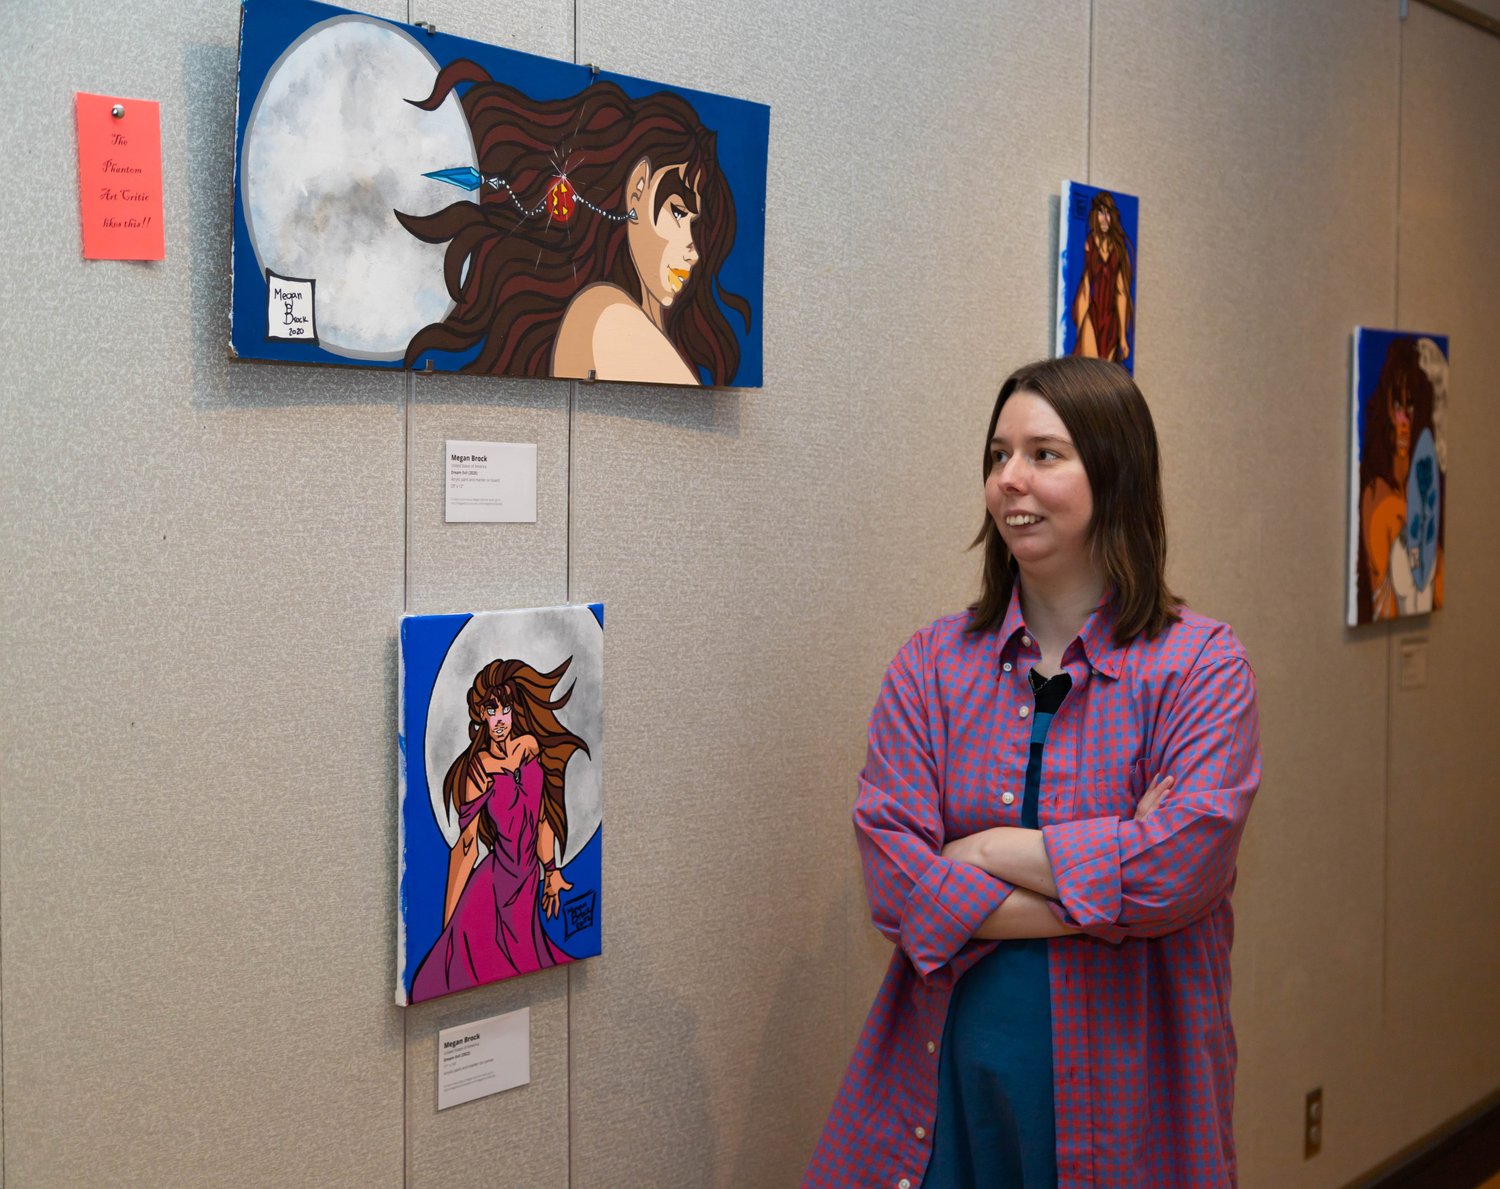 Werewolf enthusiast Megan Brock explains her artwork during an artist’s reception at Jorgenson Fine Arts Gallery at Moberly Area Community College. Brock's drawings and paintings will be on display through October.